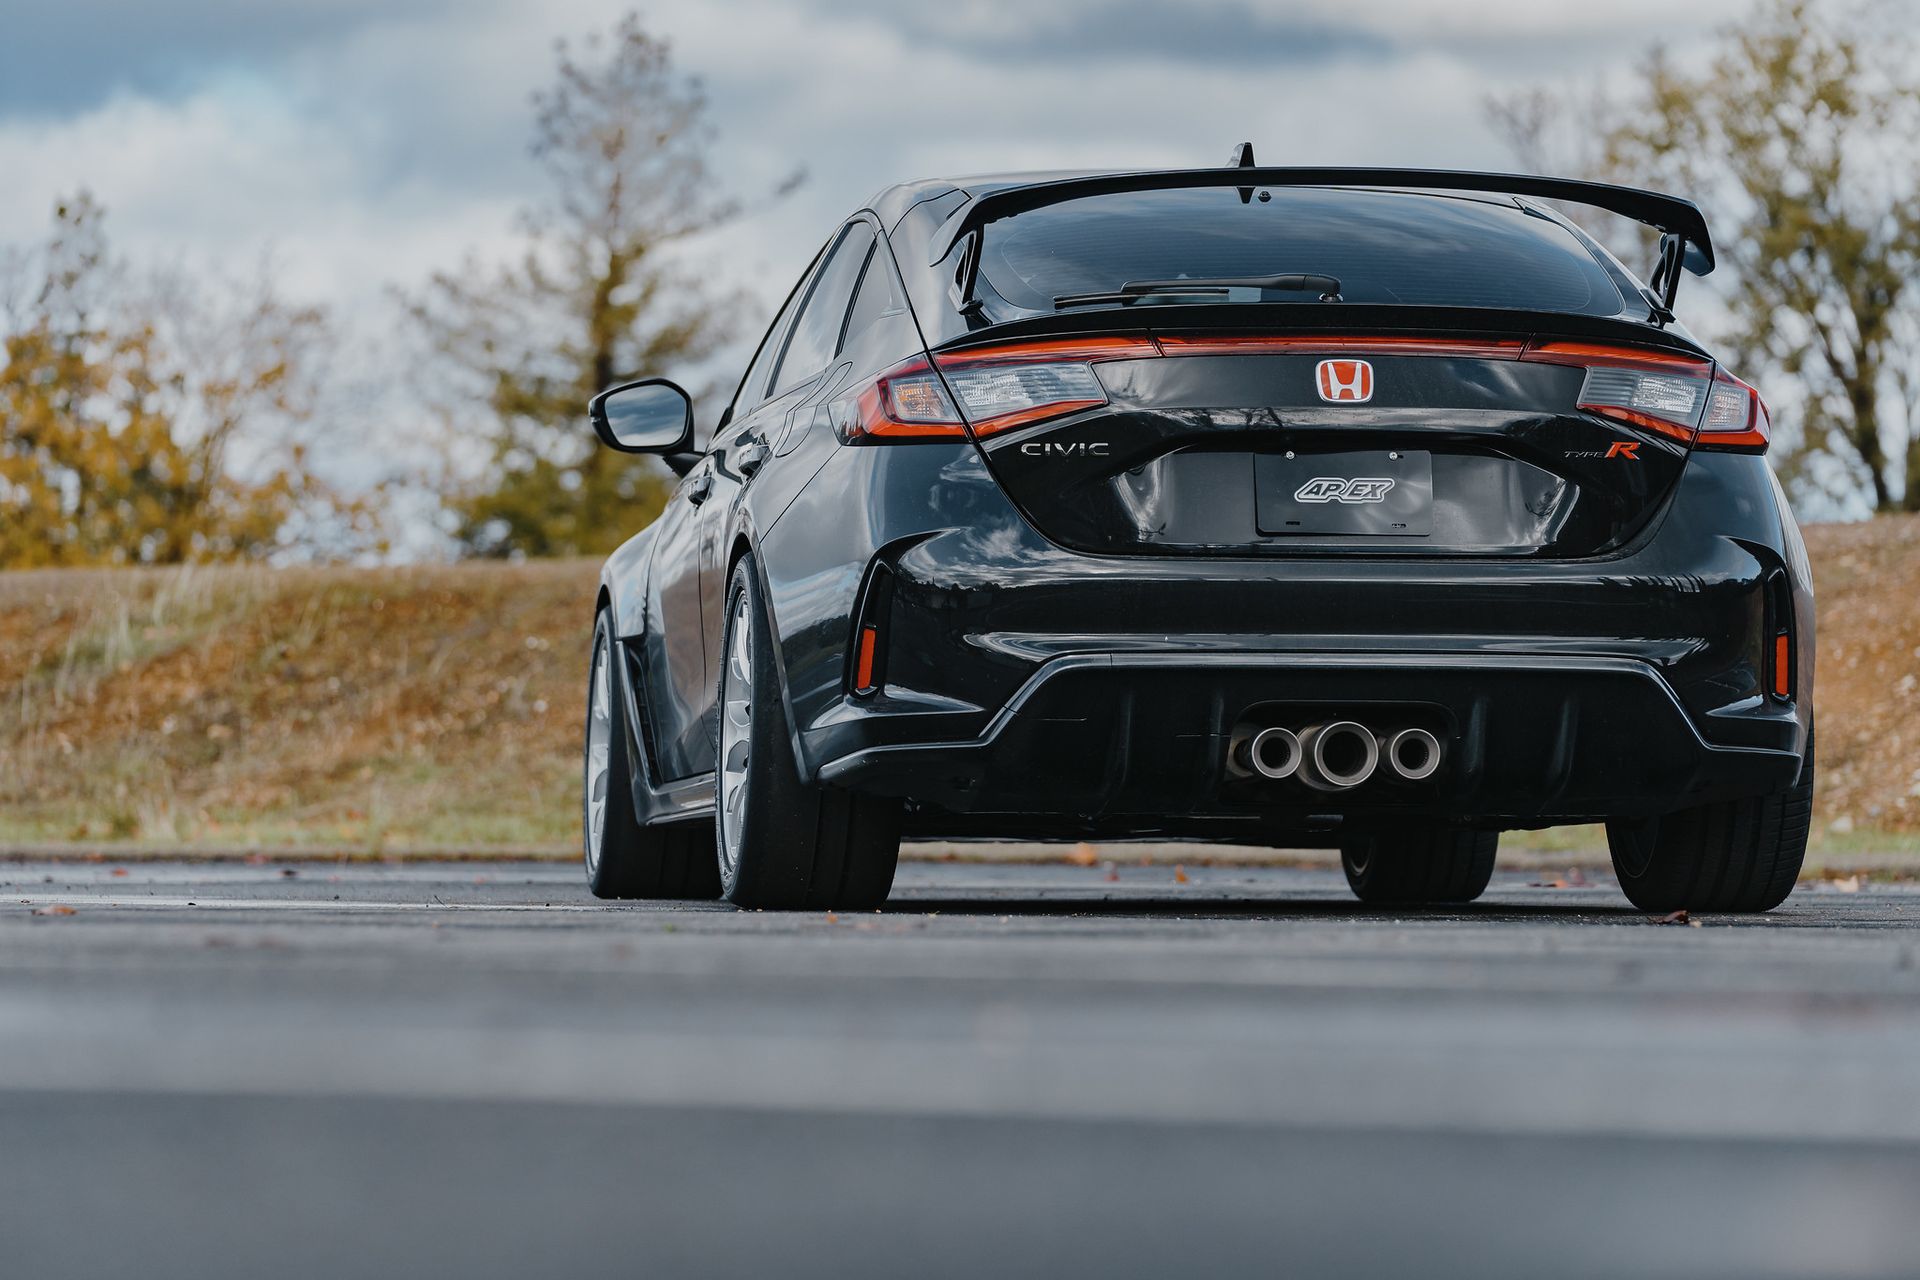 Honda FL5 Civic Type-R with 18" EC-7 in Race Silver